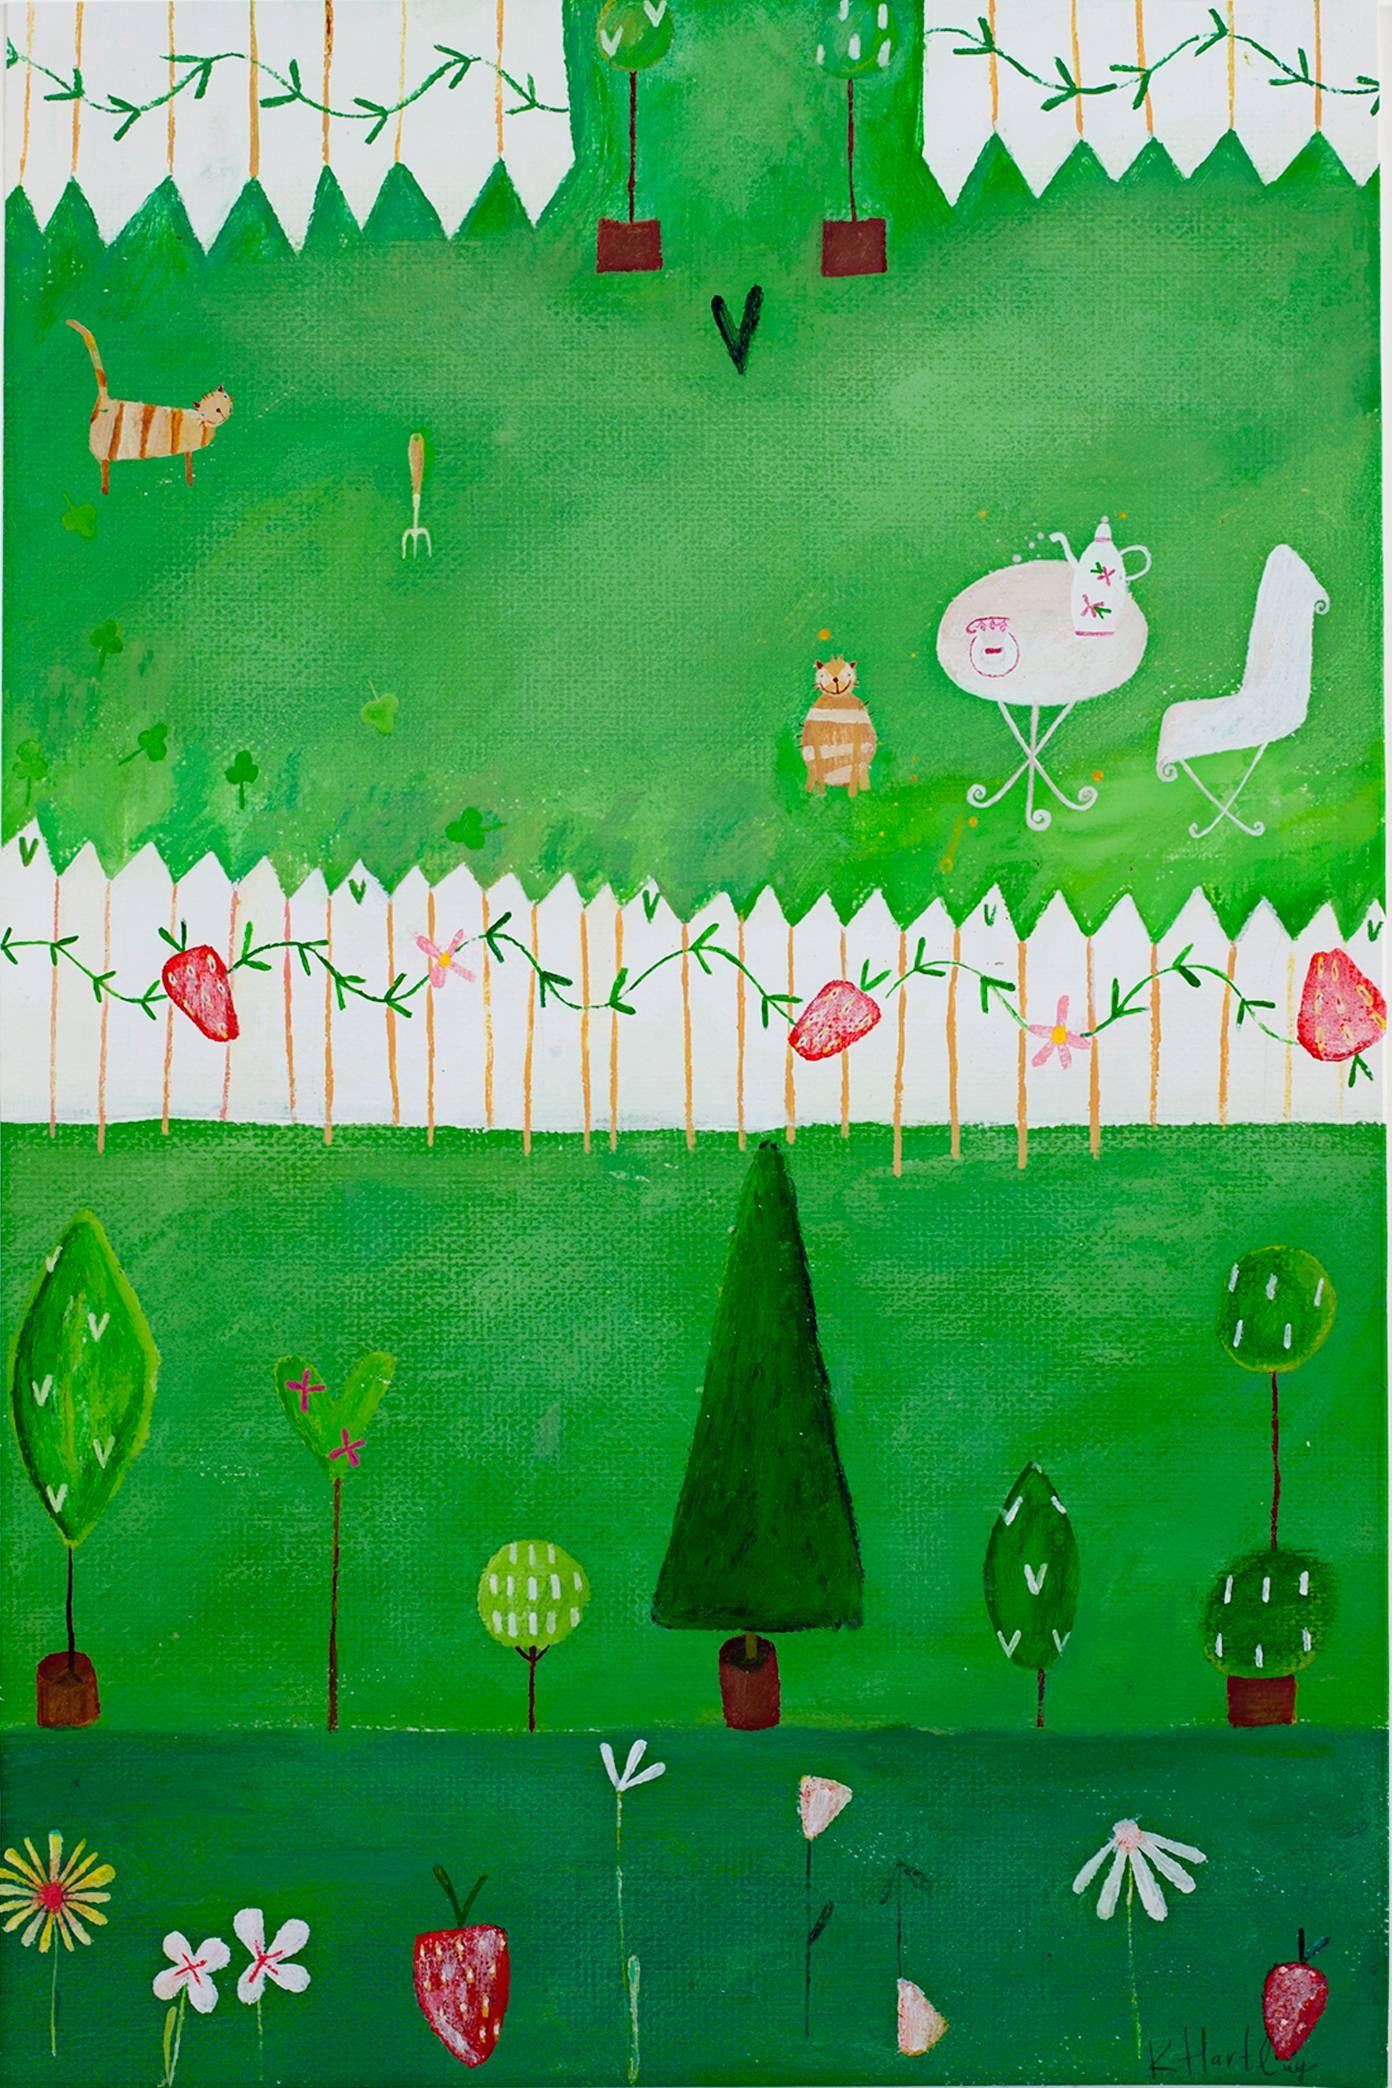 Katherine Hartley Landscape Painting - "Green Grass, Picket Fence KMH 008, " an Acrylic & Mixed Media signed by Hartley